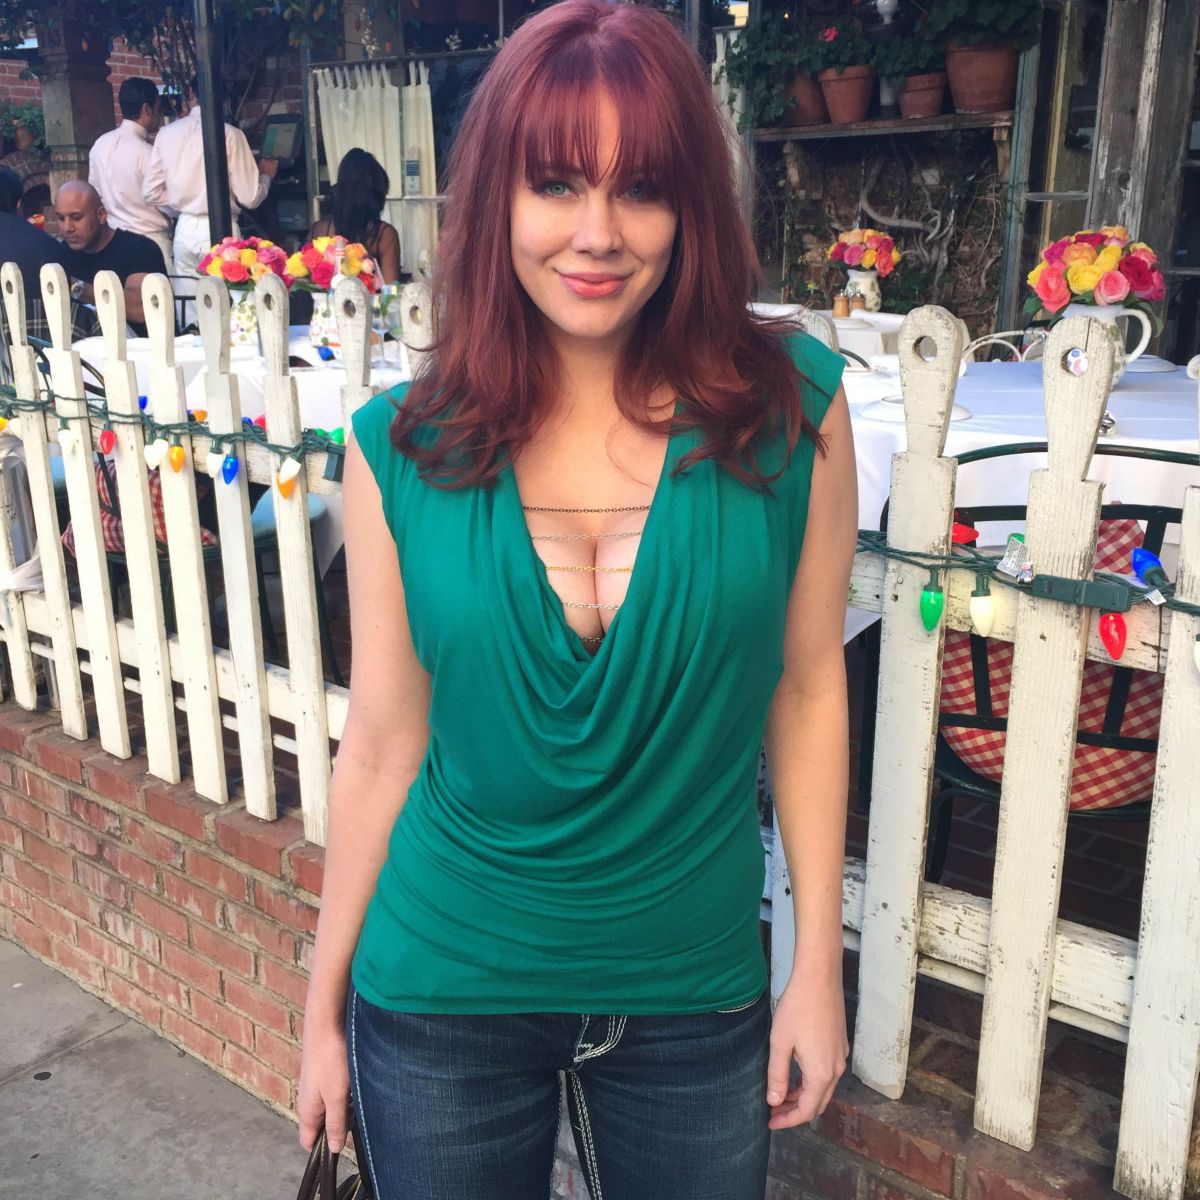 maitland-ward-out-shopping-in-los-angeles-11-17-2015_15.jpg